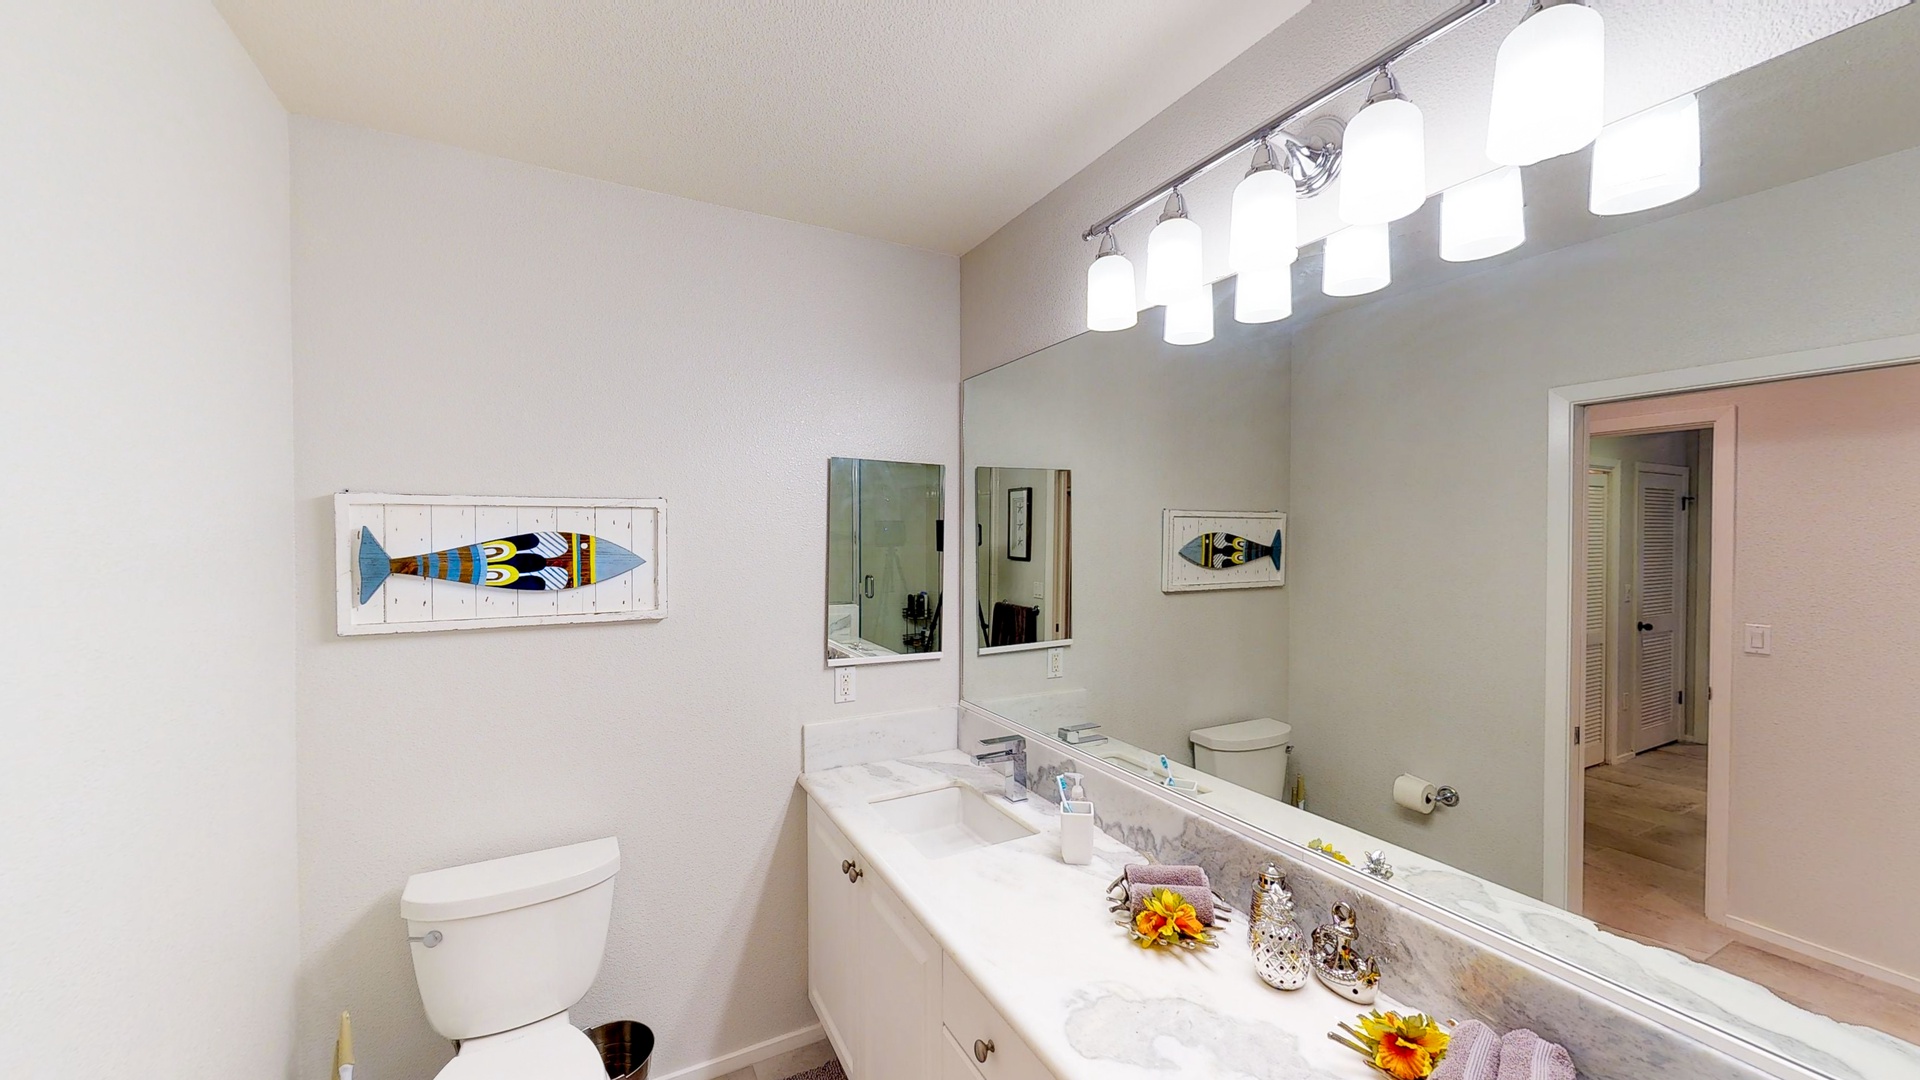 Kapolei Vacation Rentals, Coconut Plantation 1222-3 - The primary guest bathroom with a long vanity and ample lighting.